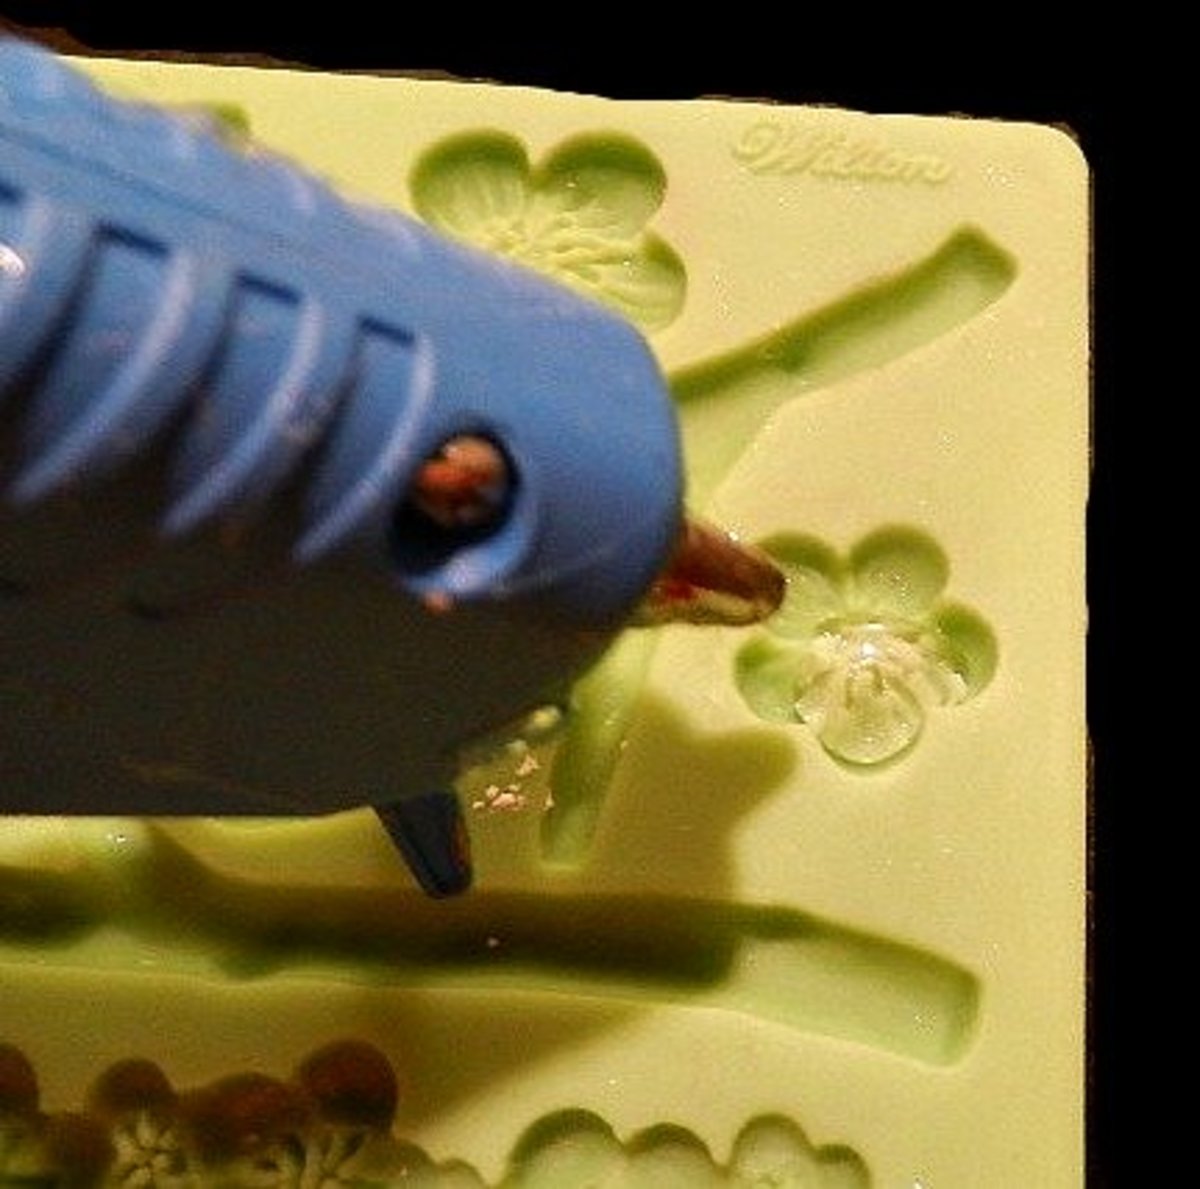 I like to put hot glue in silicone molds to make little 3D embellishments for my scrapbooks. 